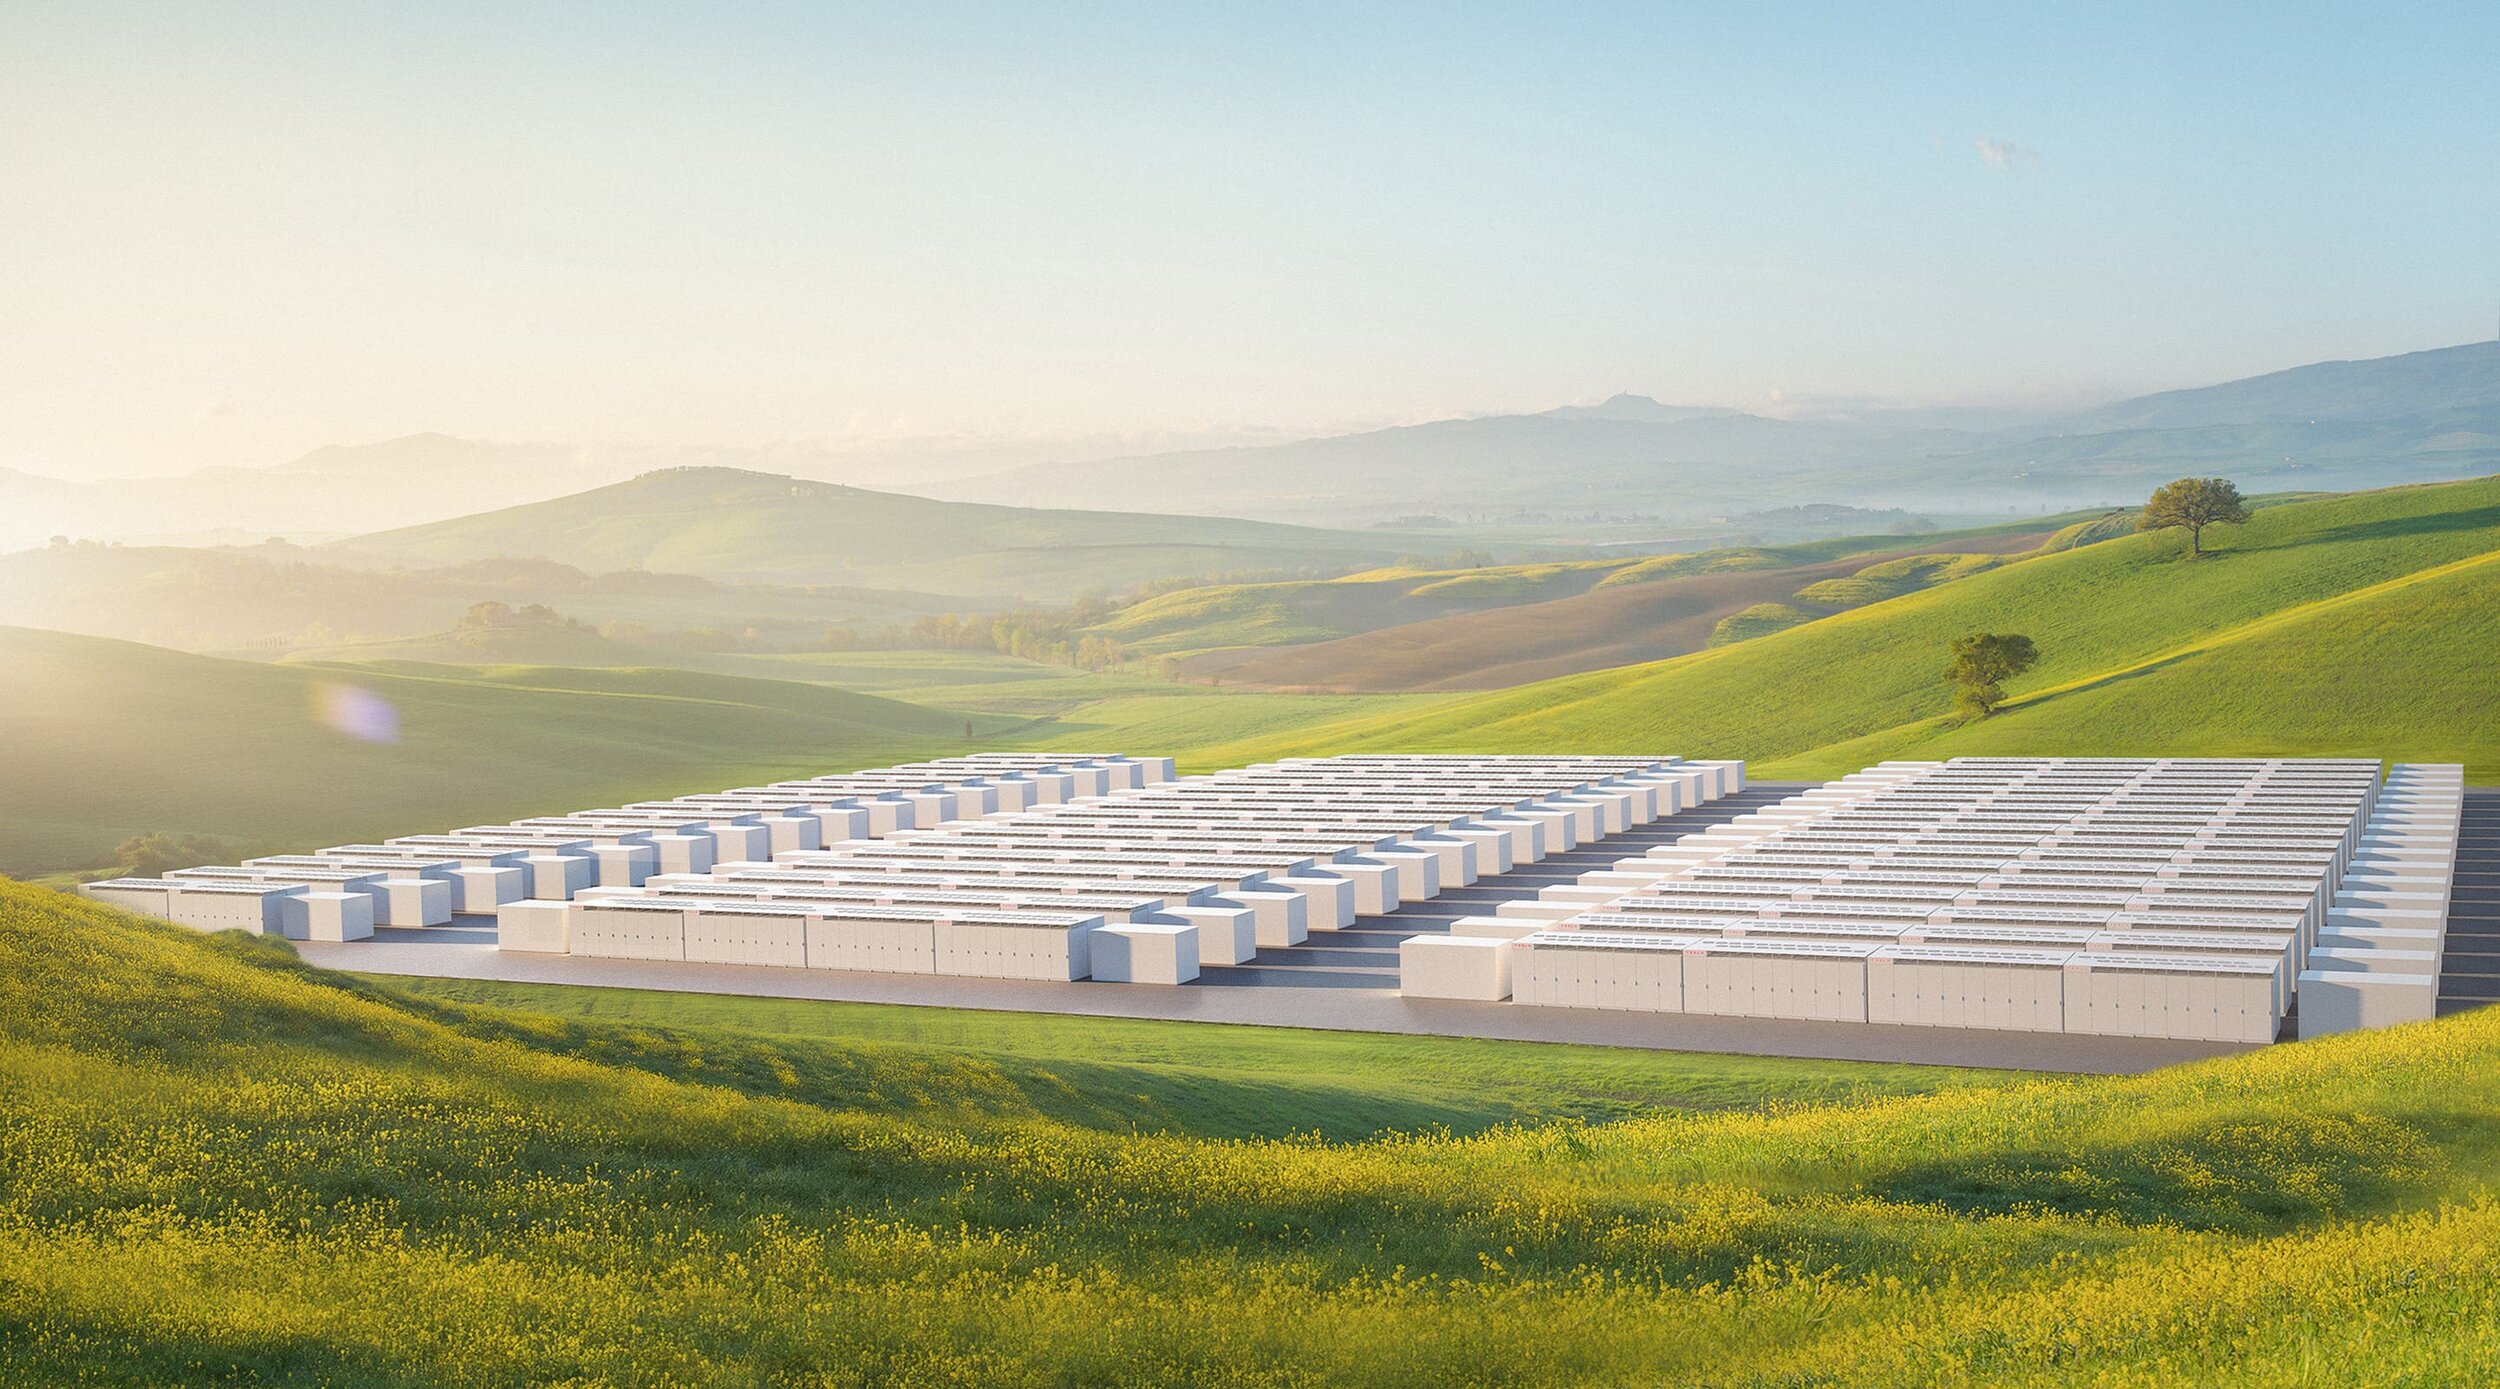  Concept drawing of Tesla's 1-gigawatt hour (GWh) megapack battery facility. If operational an energy storage system of this size could power every home in San Francisco, CA for up to 6 hours.   http://tesla.com/megapack  